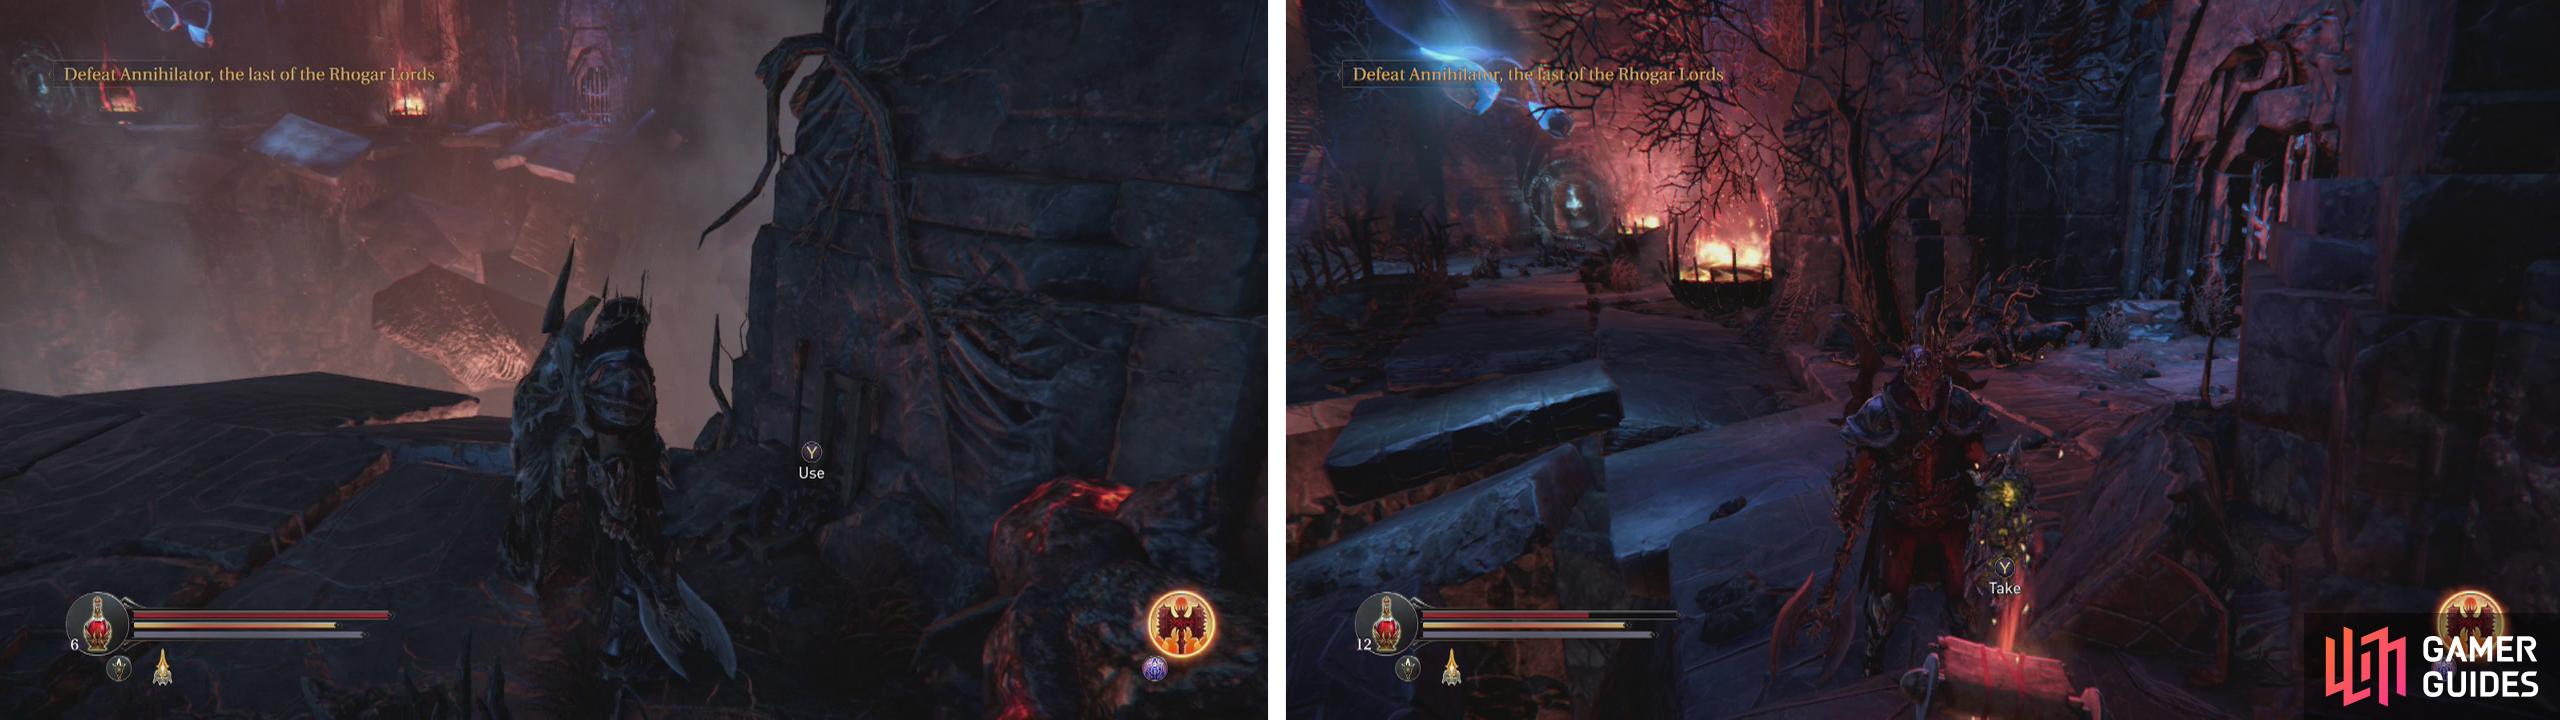 Pull the lever on the South Edge of the abyss room (left) to open the locked gate on the North side of the abyss (right). Inside is the Staffs Head quest item.